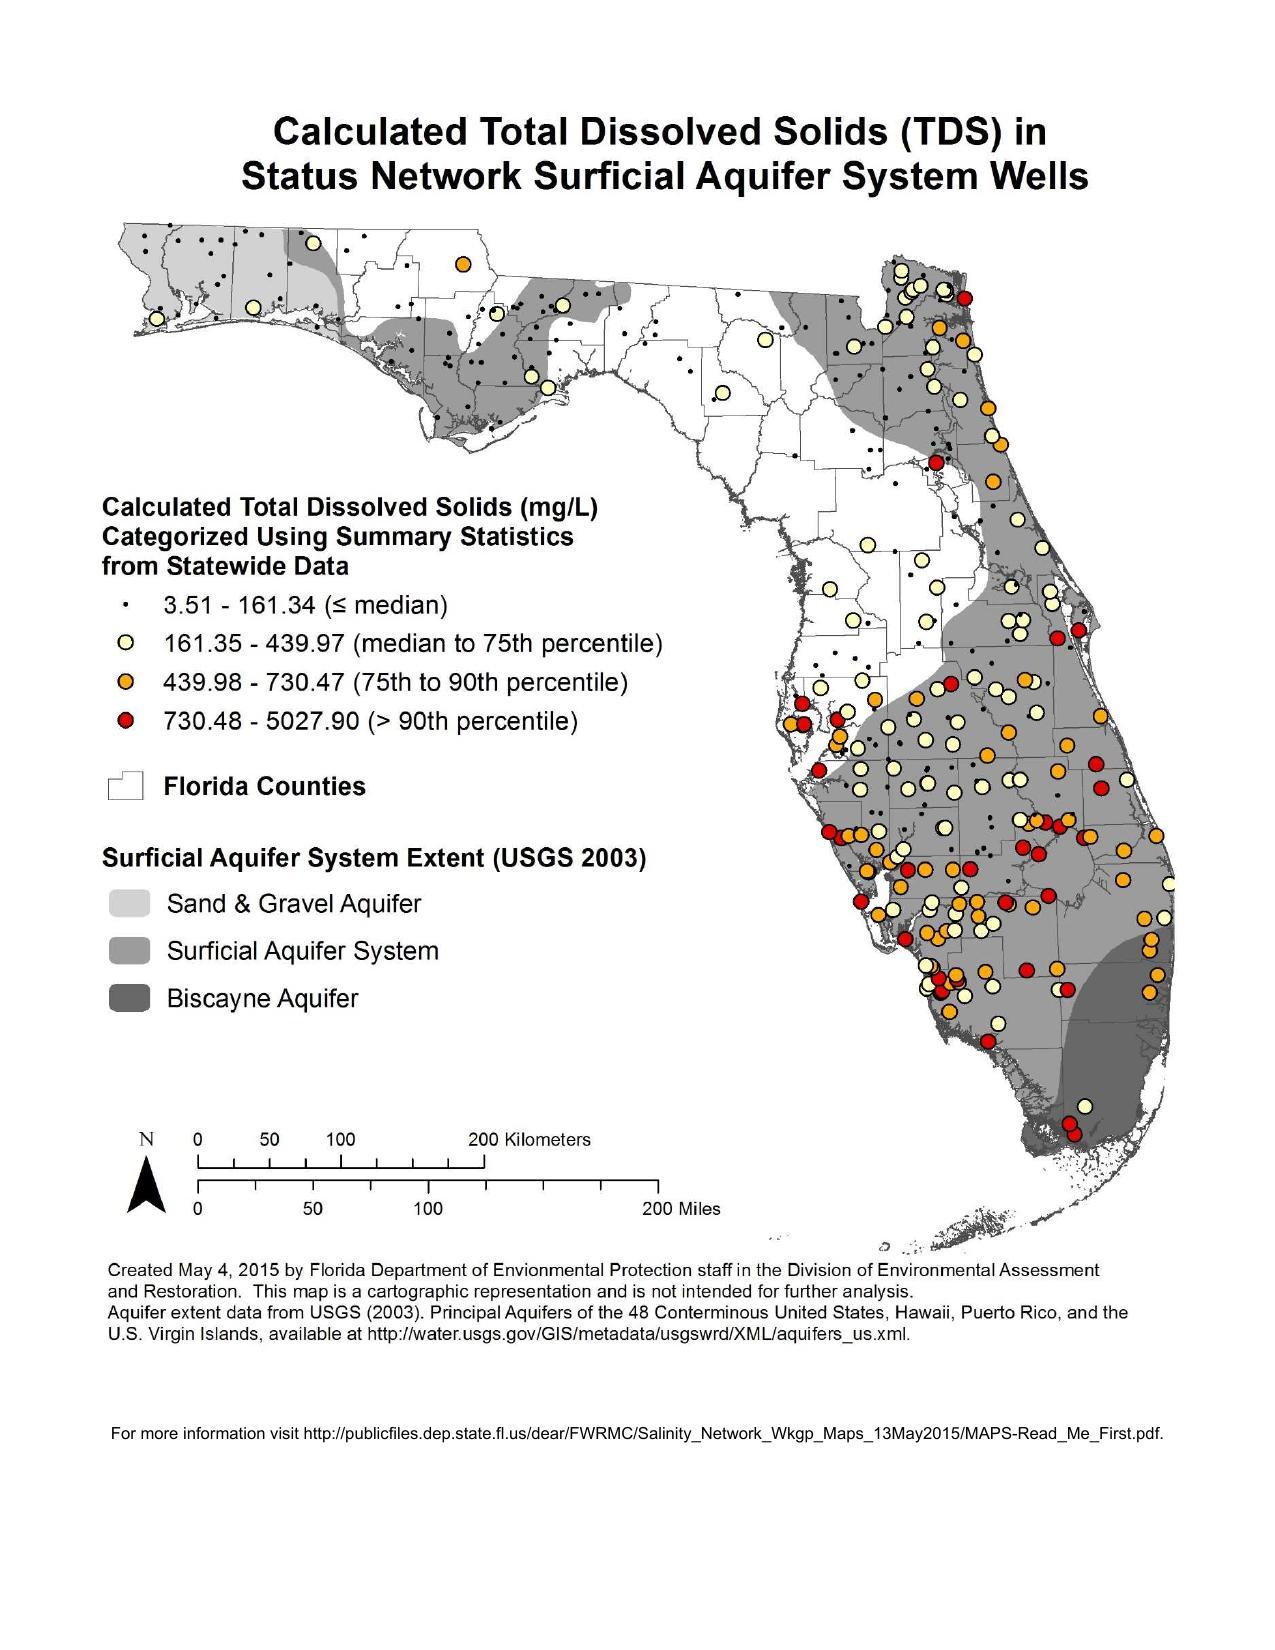 1275x1650 Calculated Total Dissolved Solids (TDS) in Status Network Surficial Aquifer System Wells, in Florida Well Salinity Study, by FL-DEP, 13 July 2015